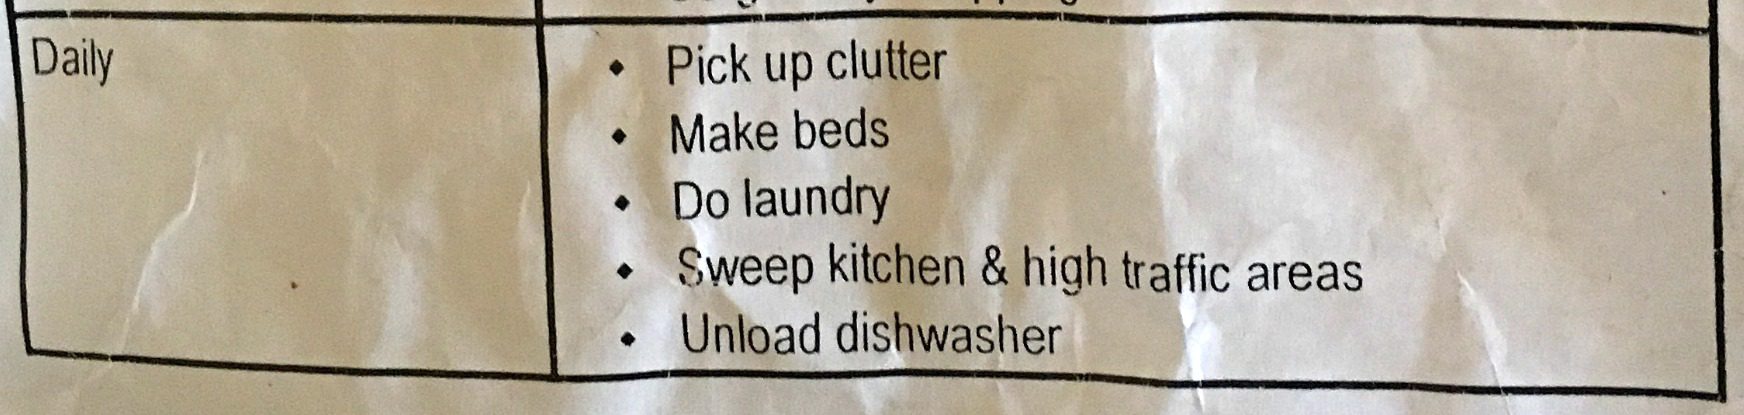 daily cleaning list non-negotiables at ASlobComesClean.com